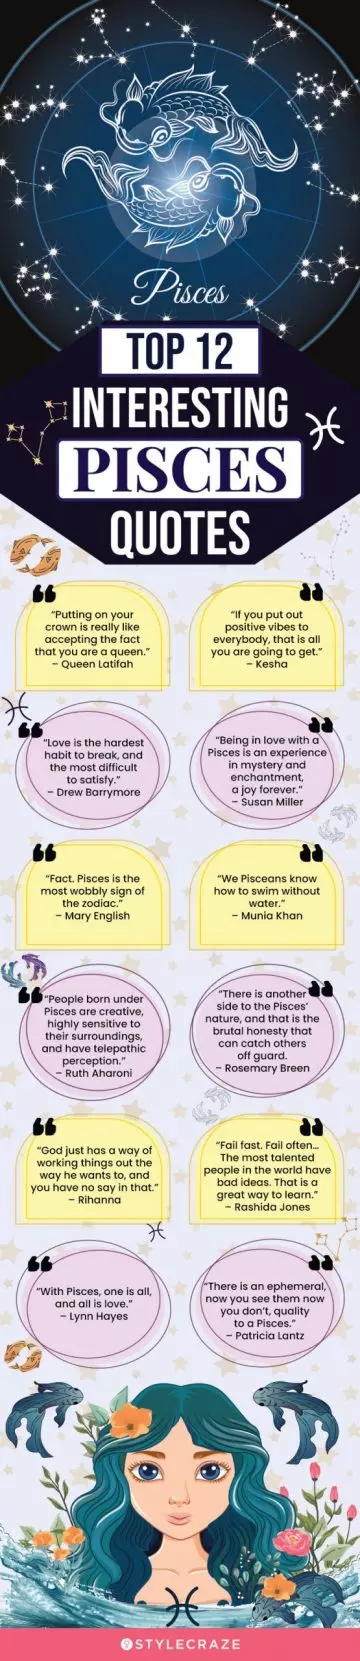 top 12 interesting pisces quotes (infographic)